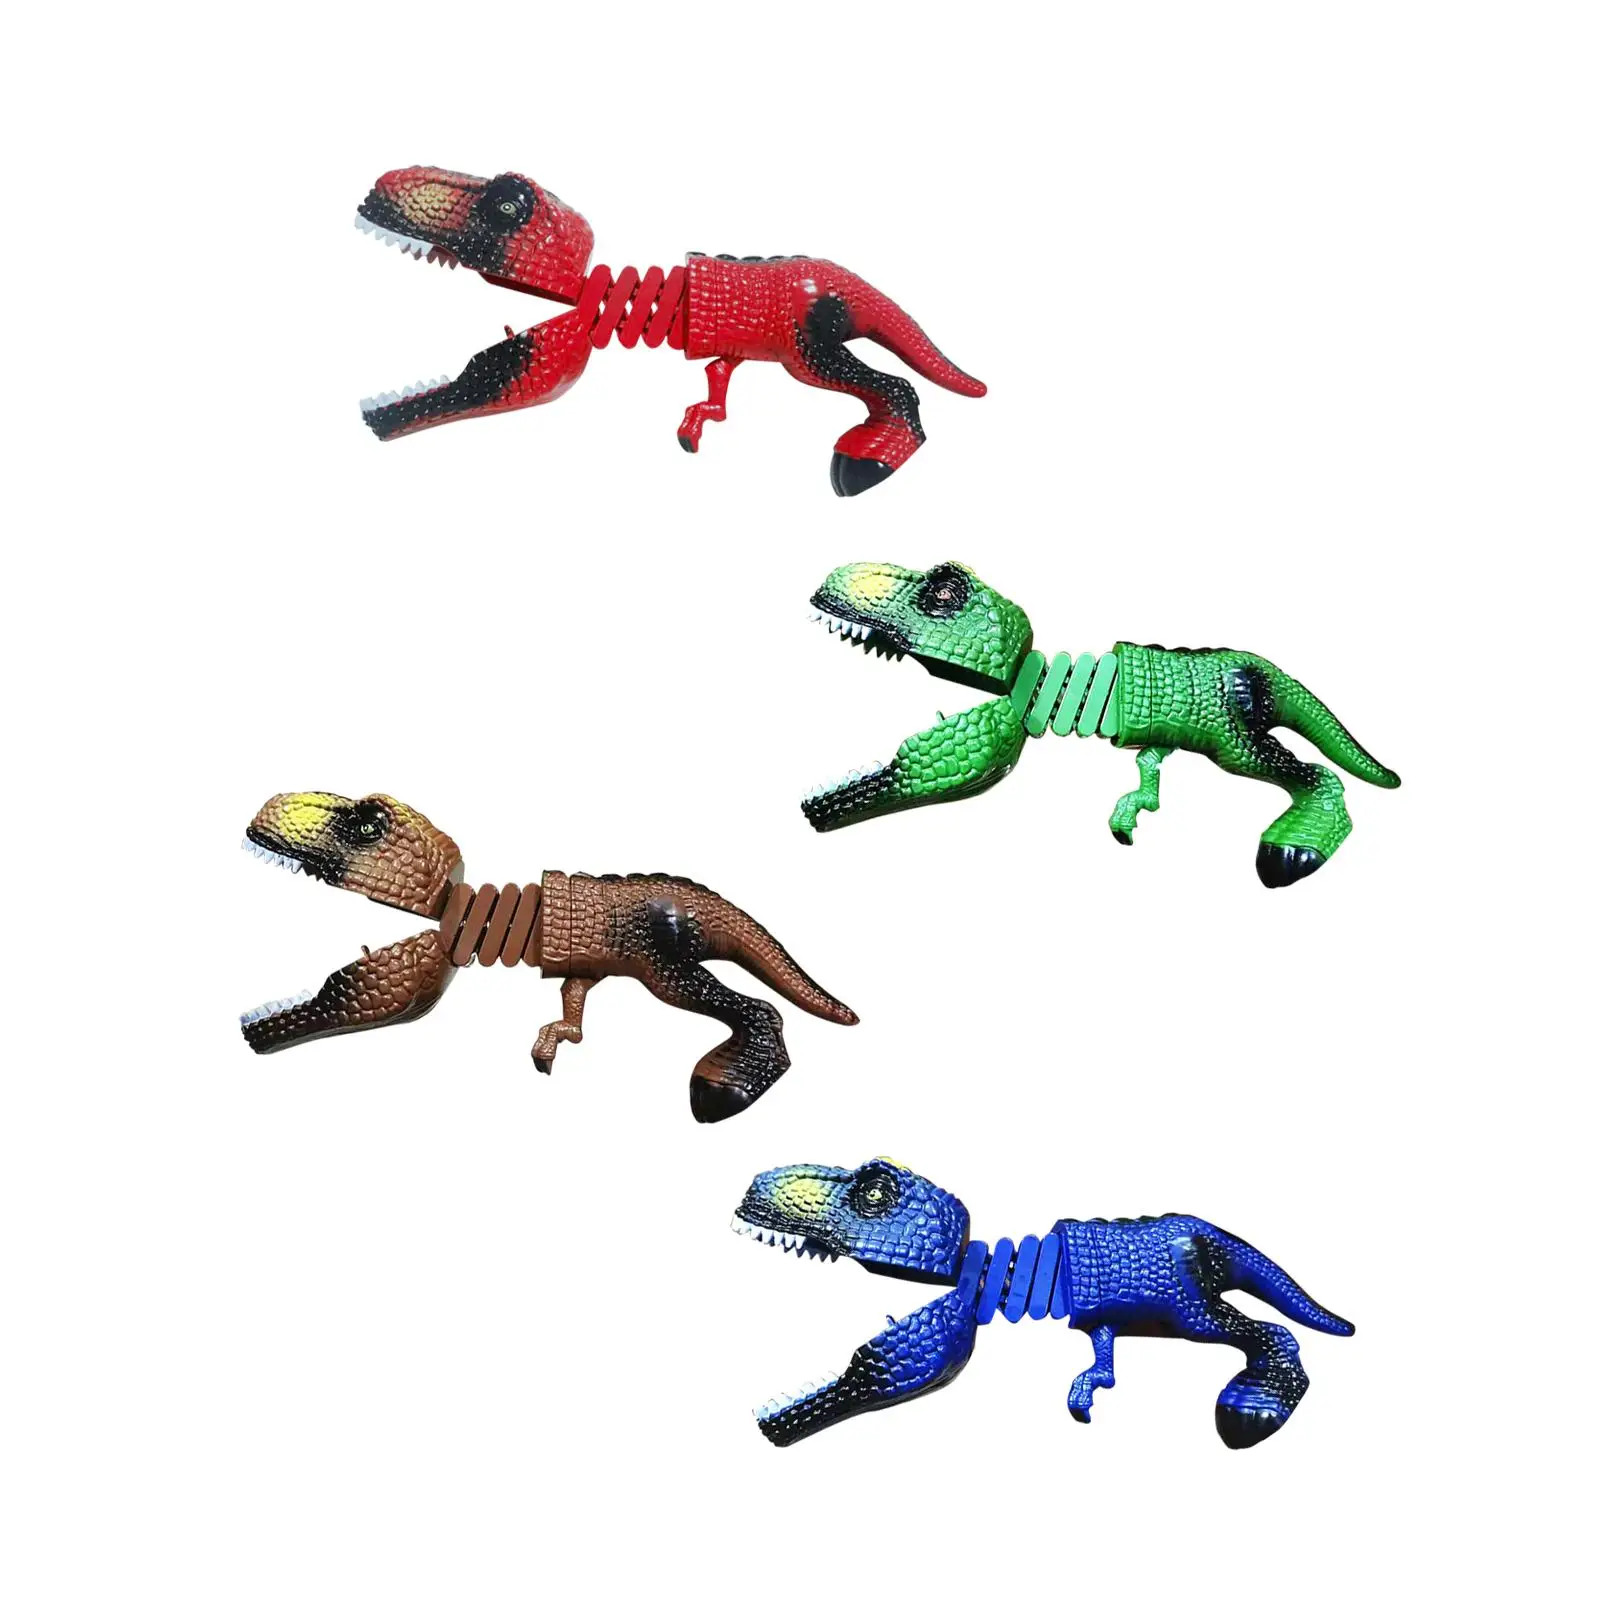 Pick Up Learning Toy Dinosaur Figures for Kids Birthday Present